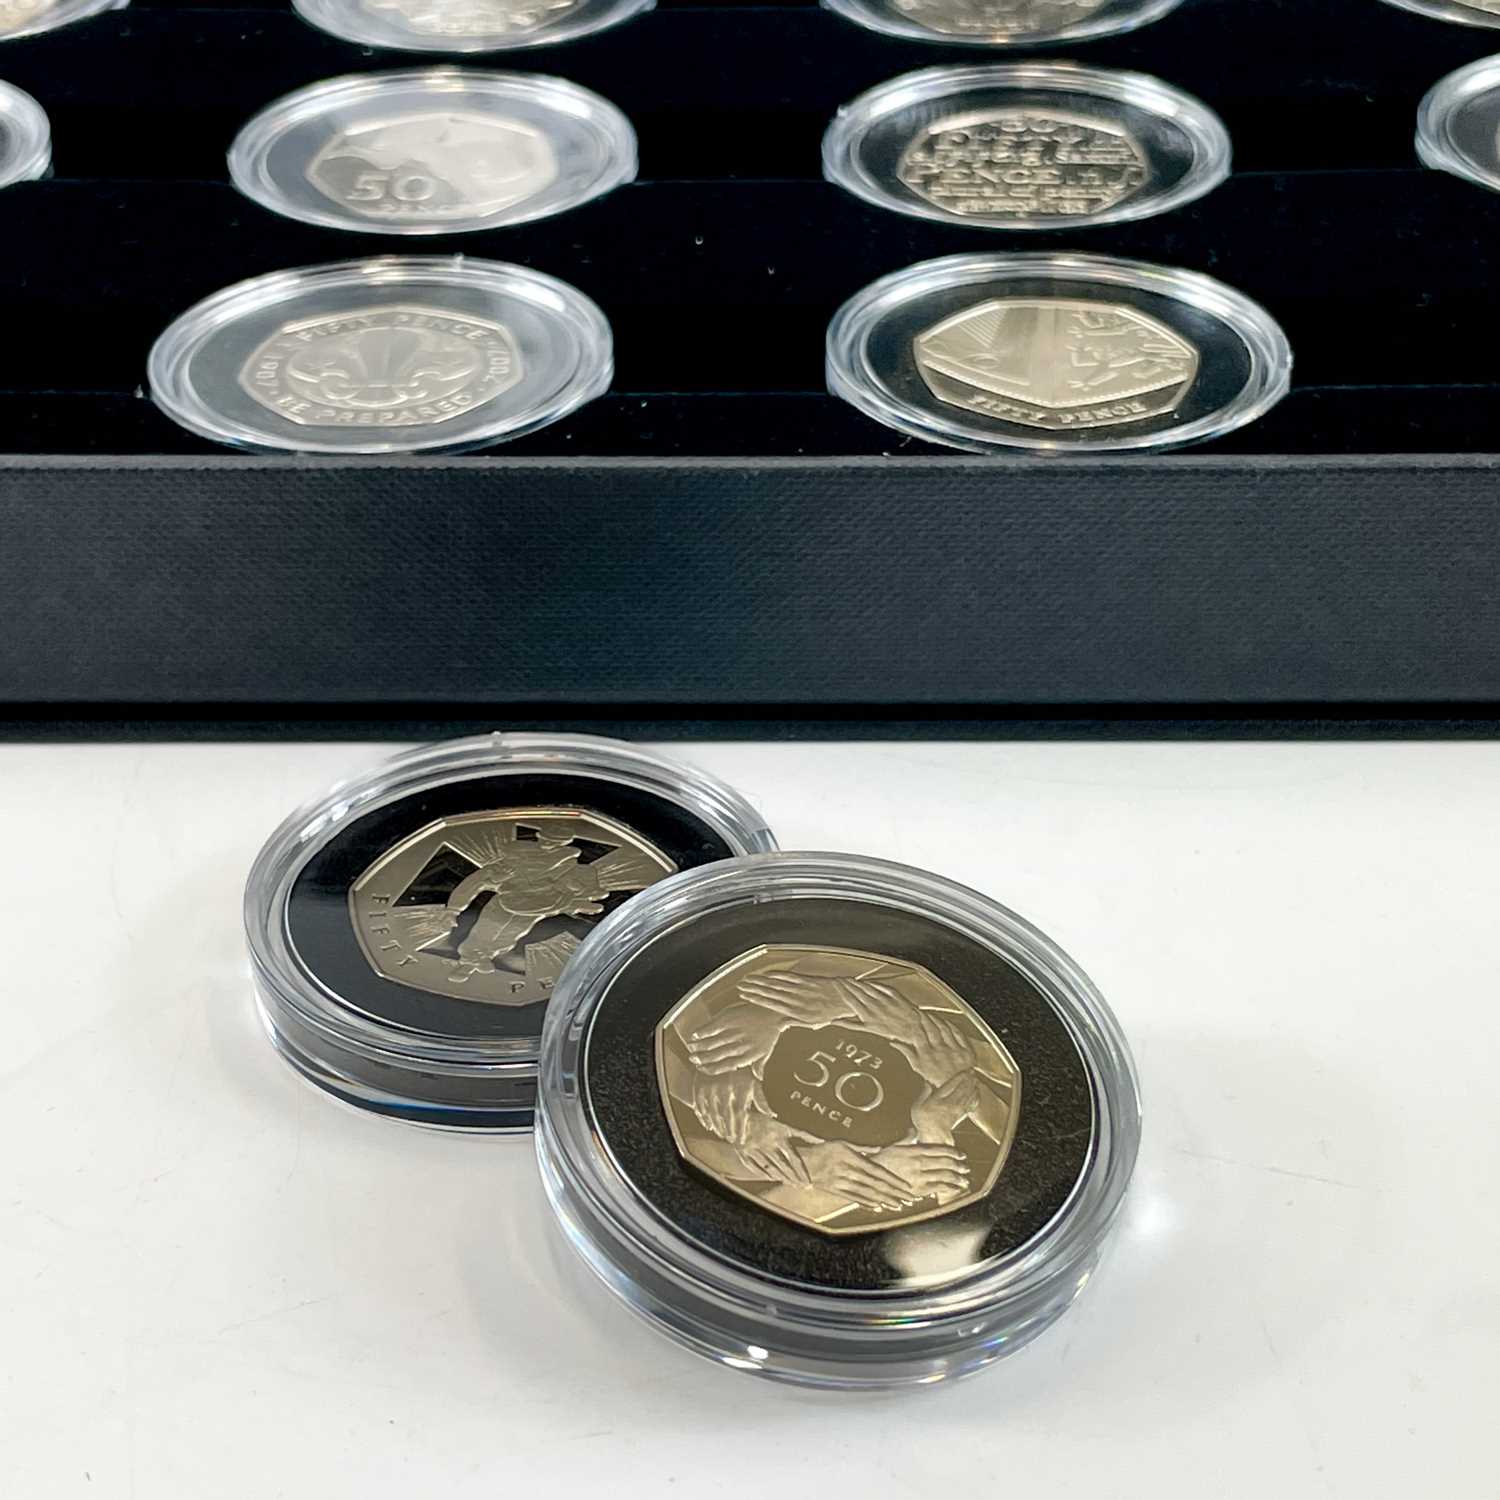 UK 50 pence proof collection - 40th anniversary 1969 to 2009. - Image 9 of 9